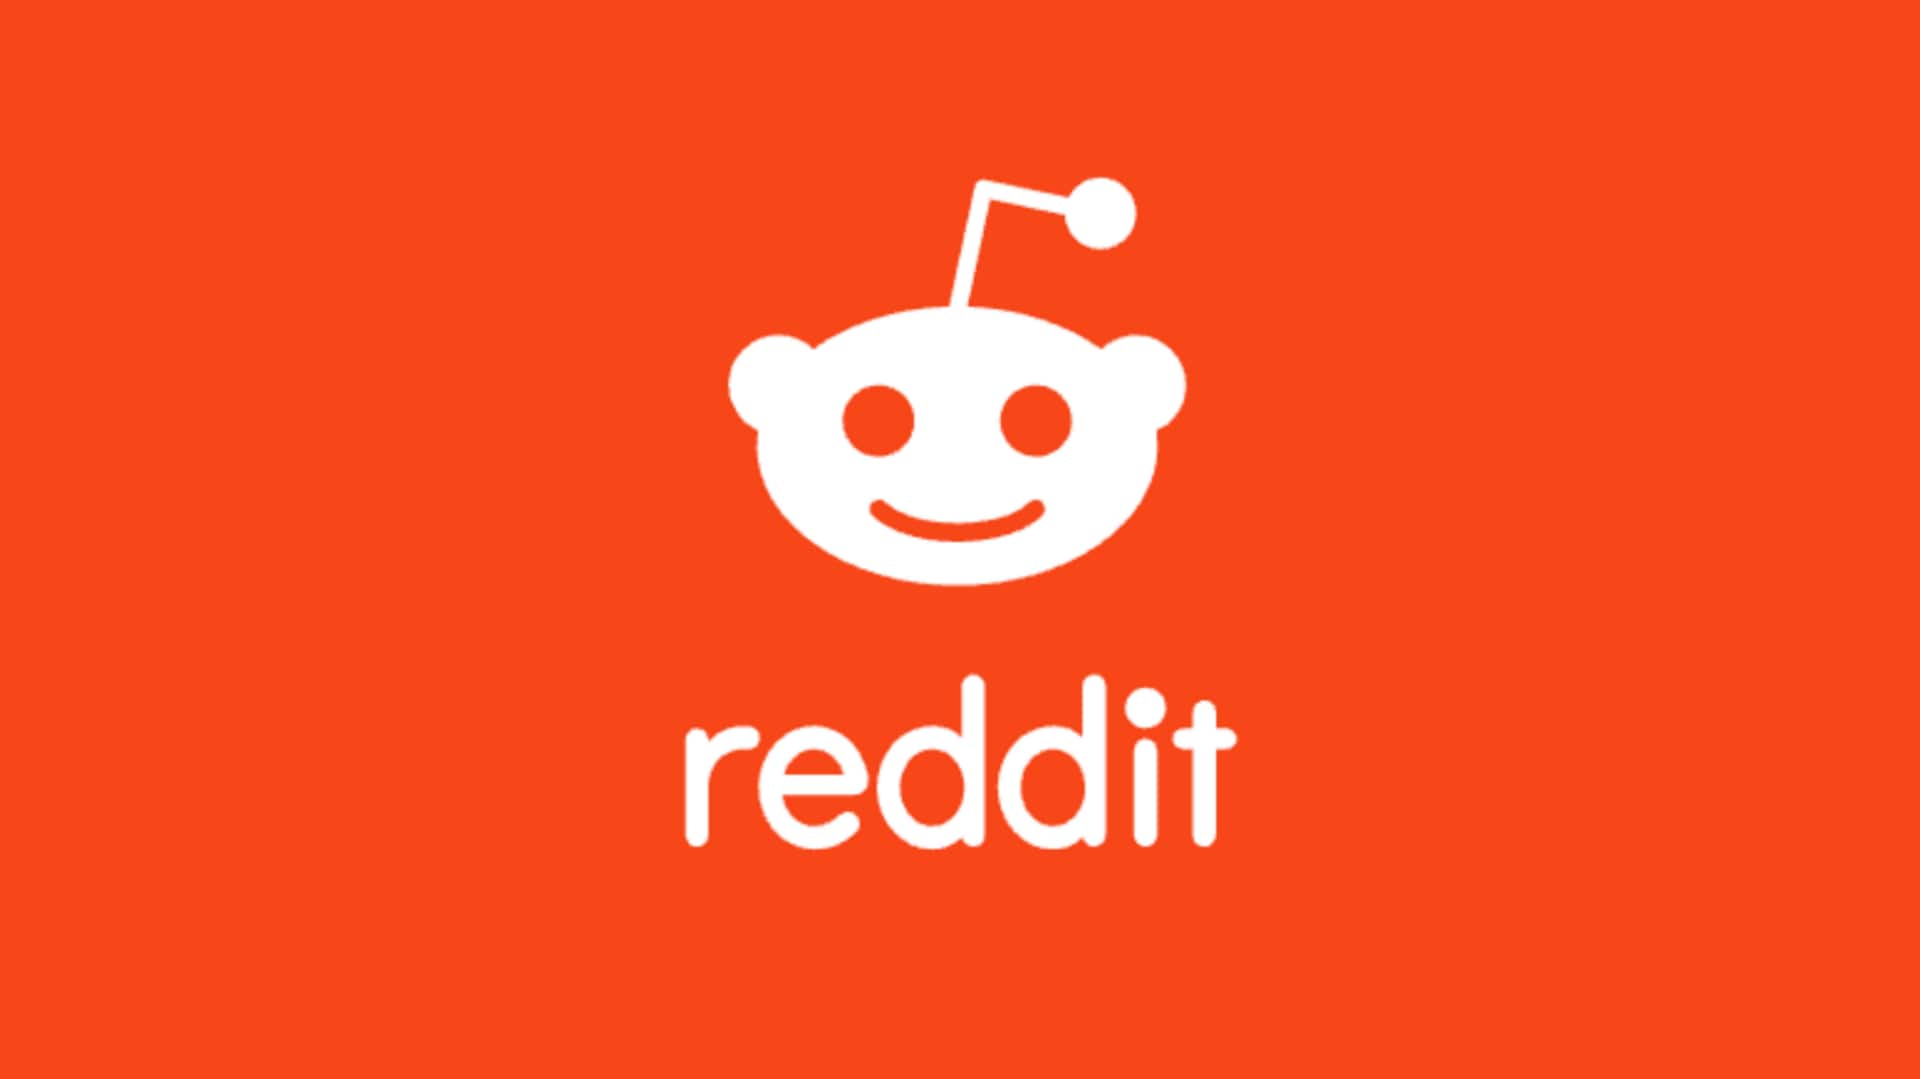 Reddit will not let users opt out of personalized ads